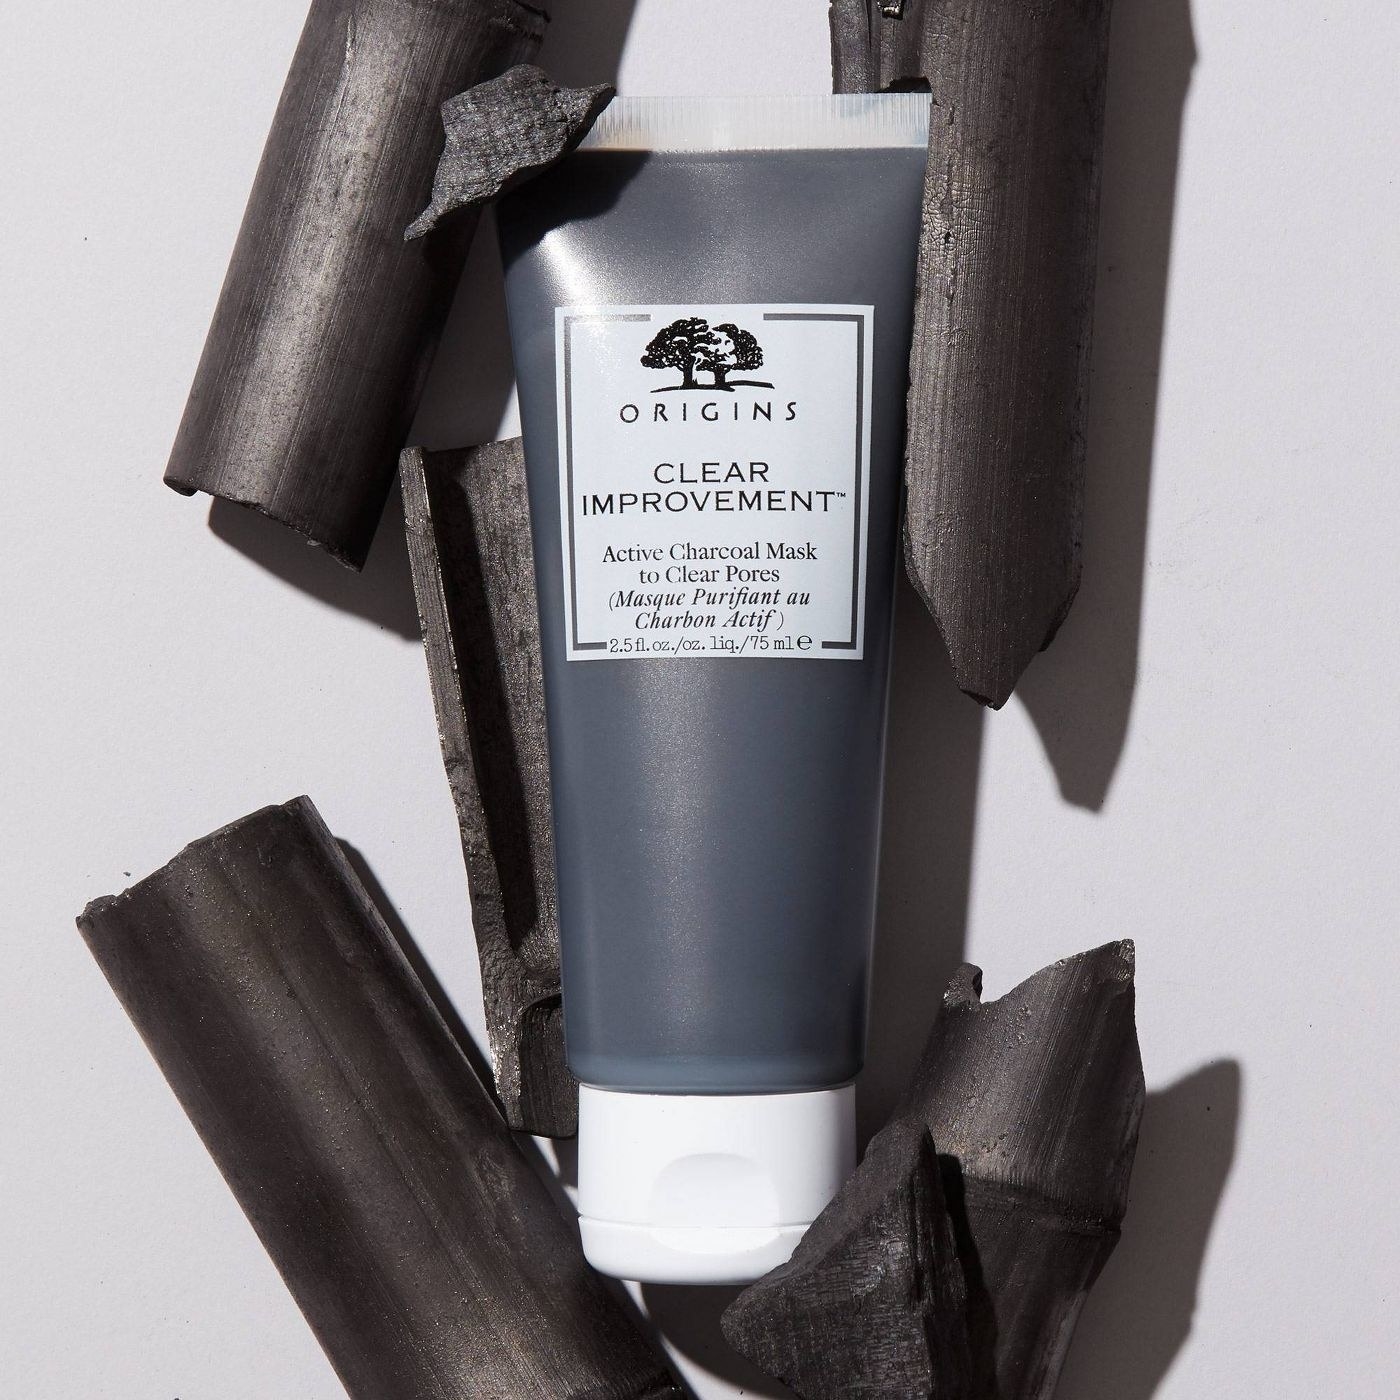 The Origins charcoal face mask